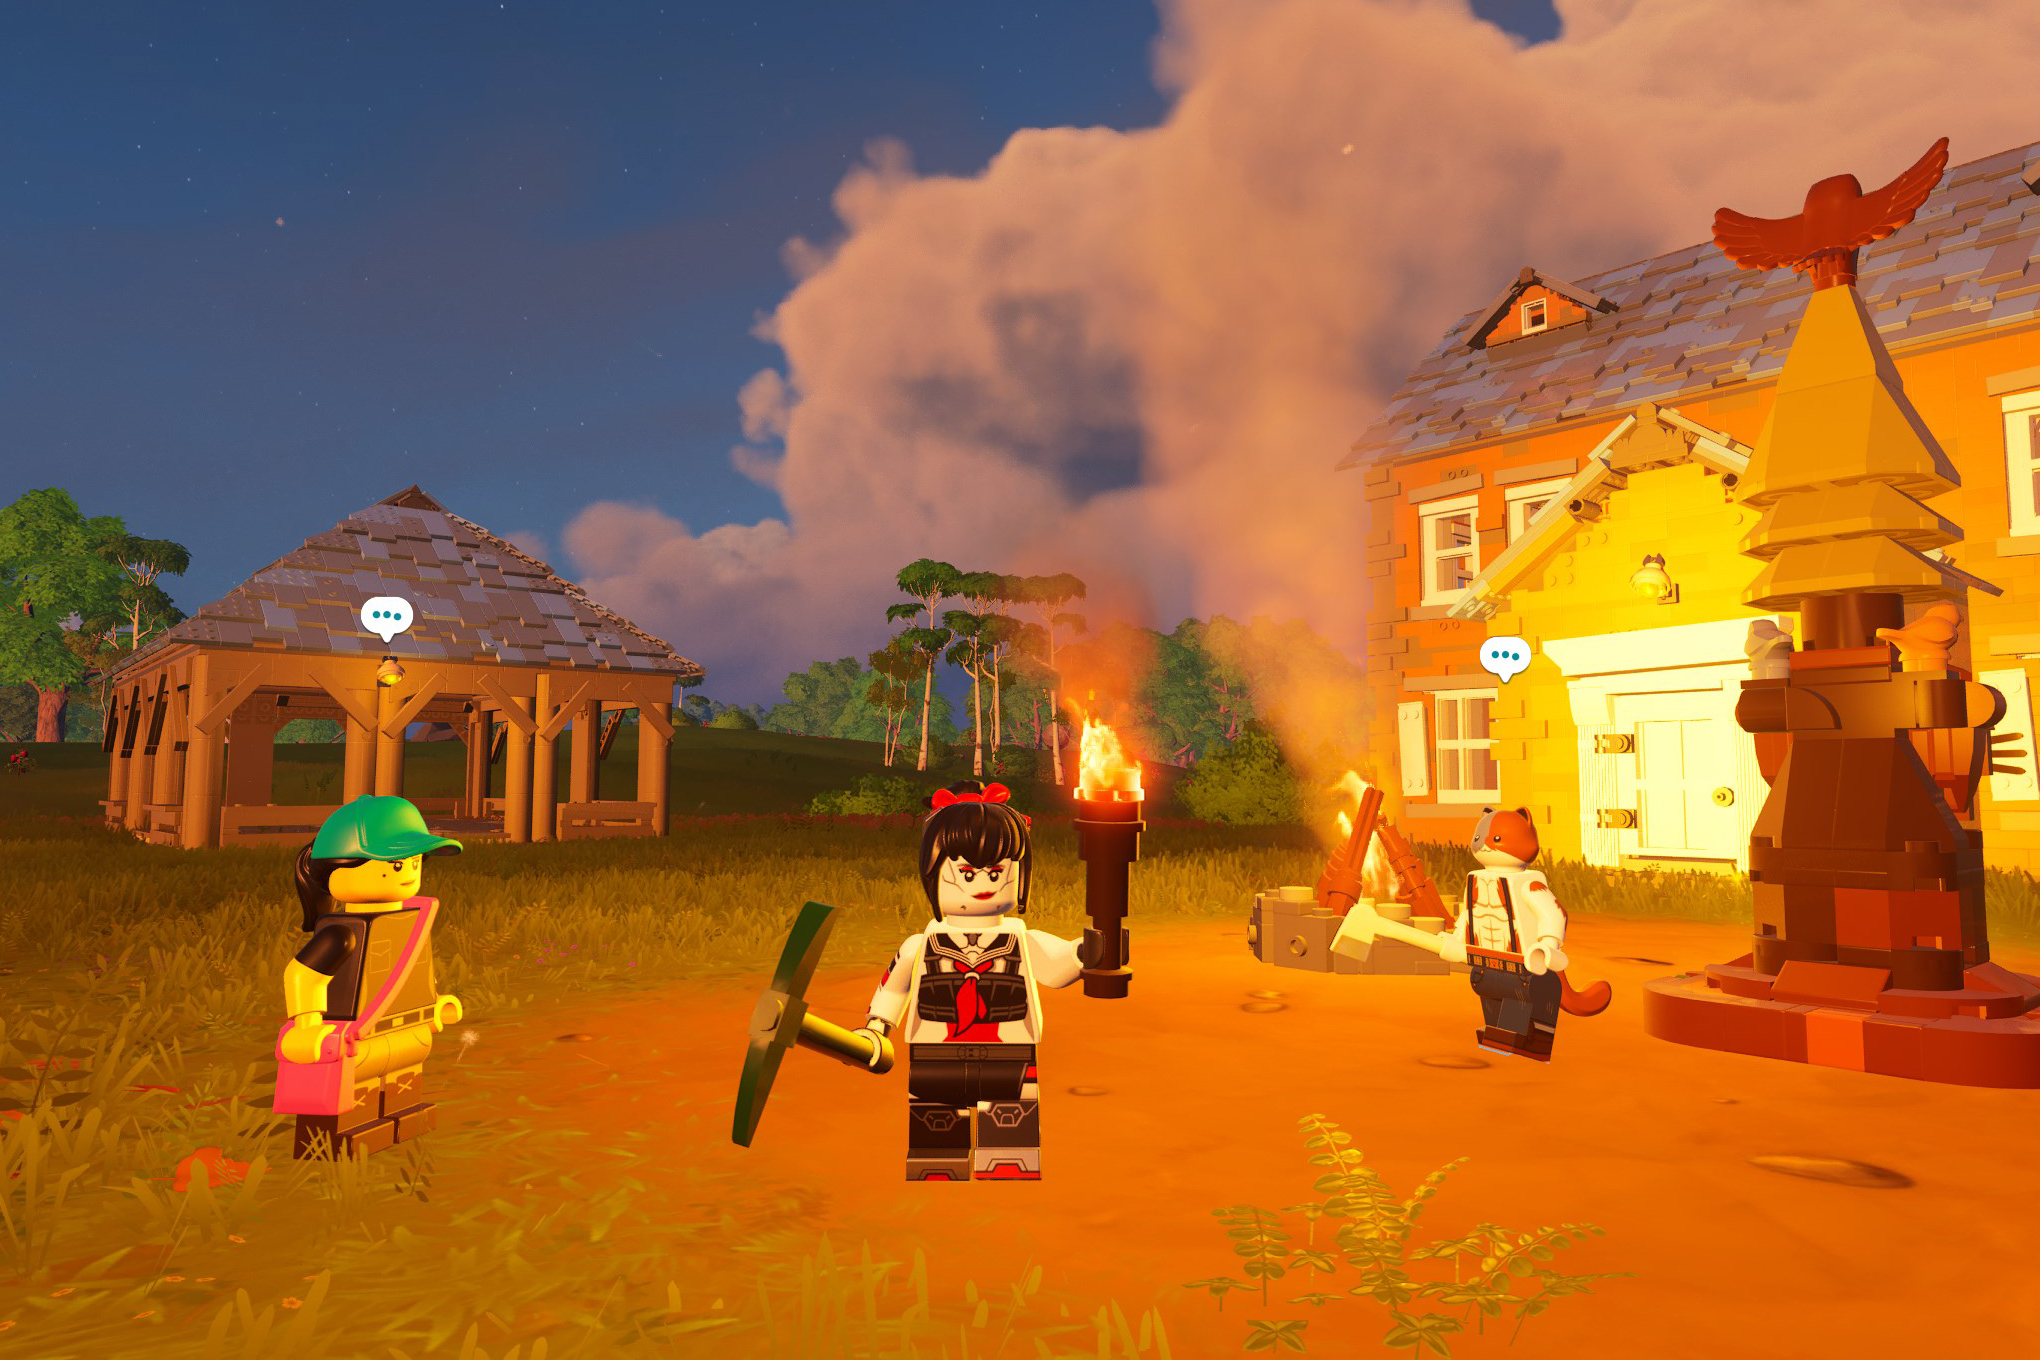 A Lego Fortnite character holds up a torch in a modest village